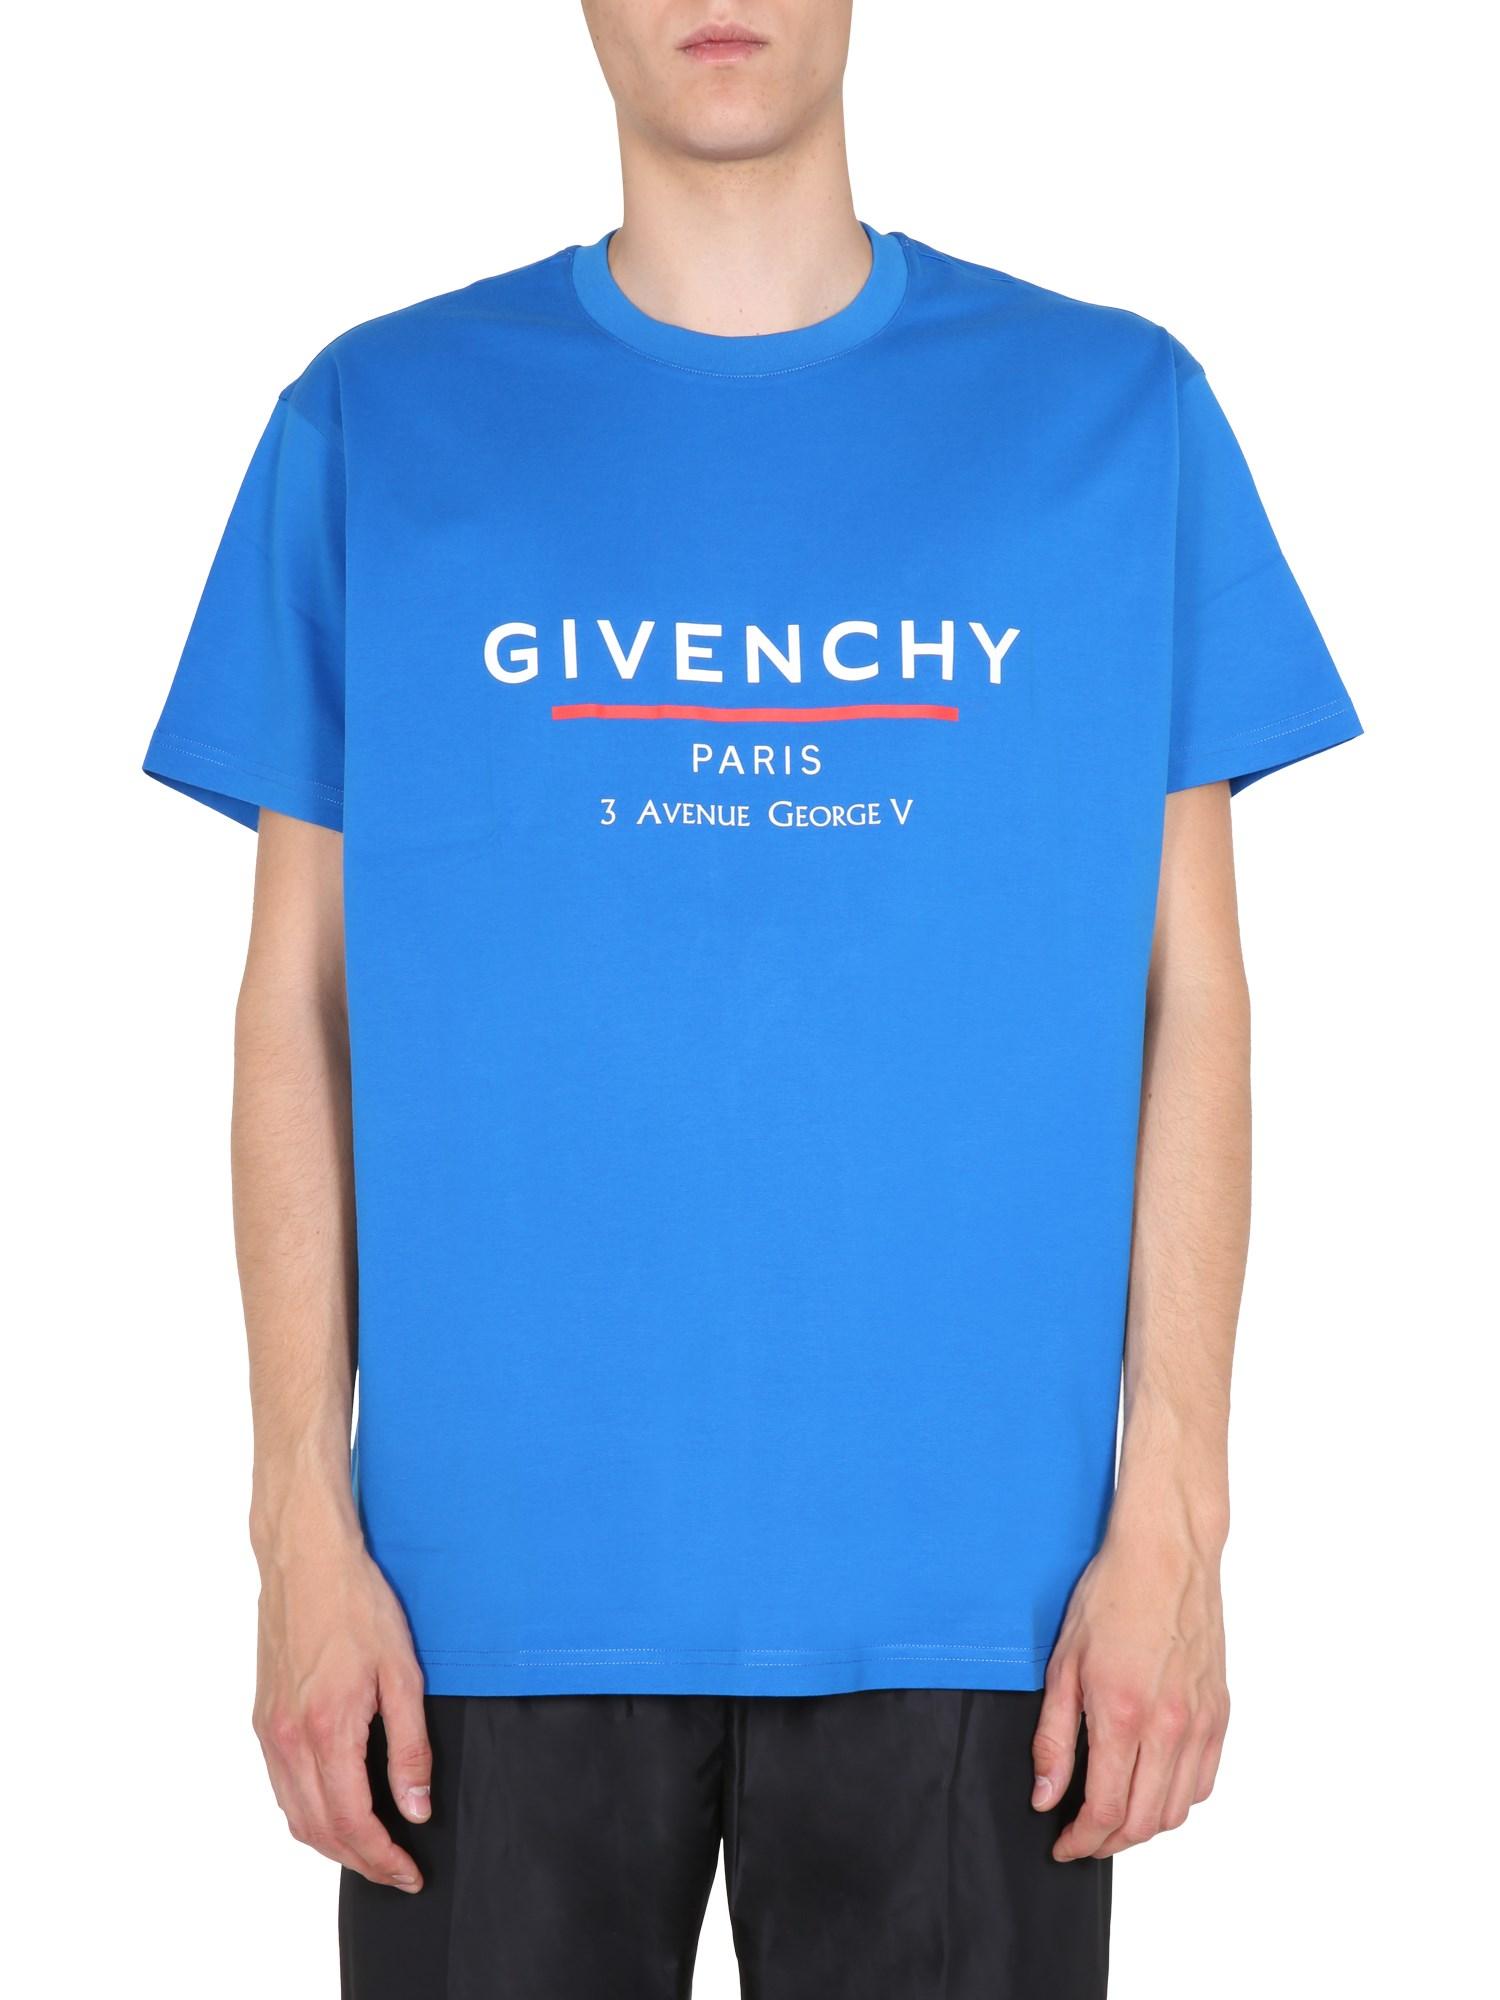 Givenchy Oversize Fit Cotton T-shirt With Logo in Blue for Men - Lyst